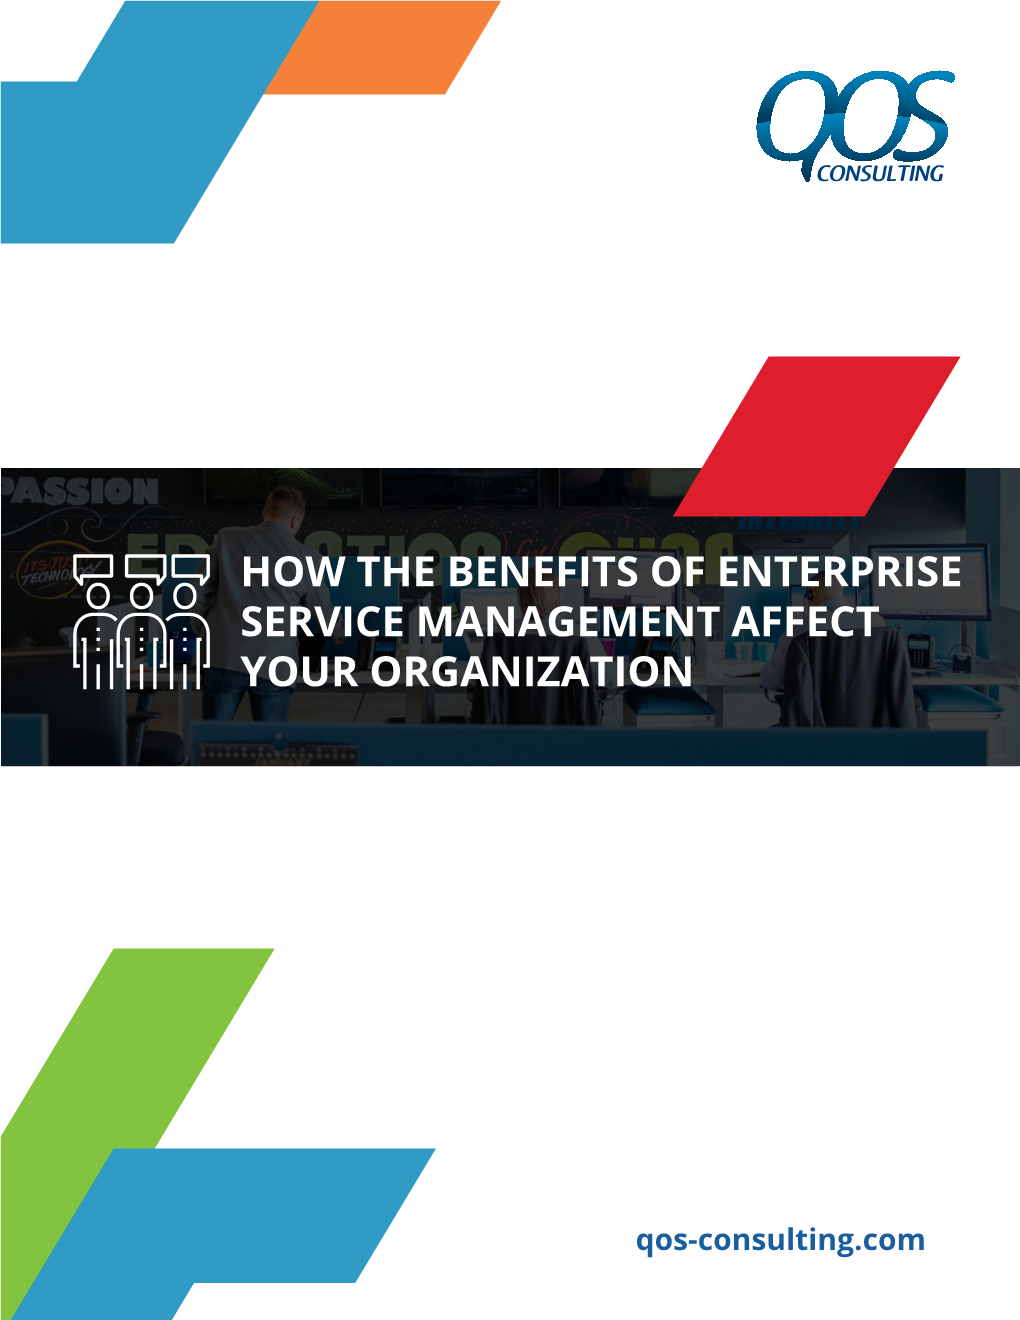 How the Benefits of Enterprise Service Management Affect Your Organization